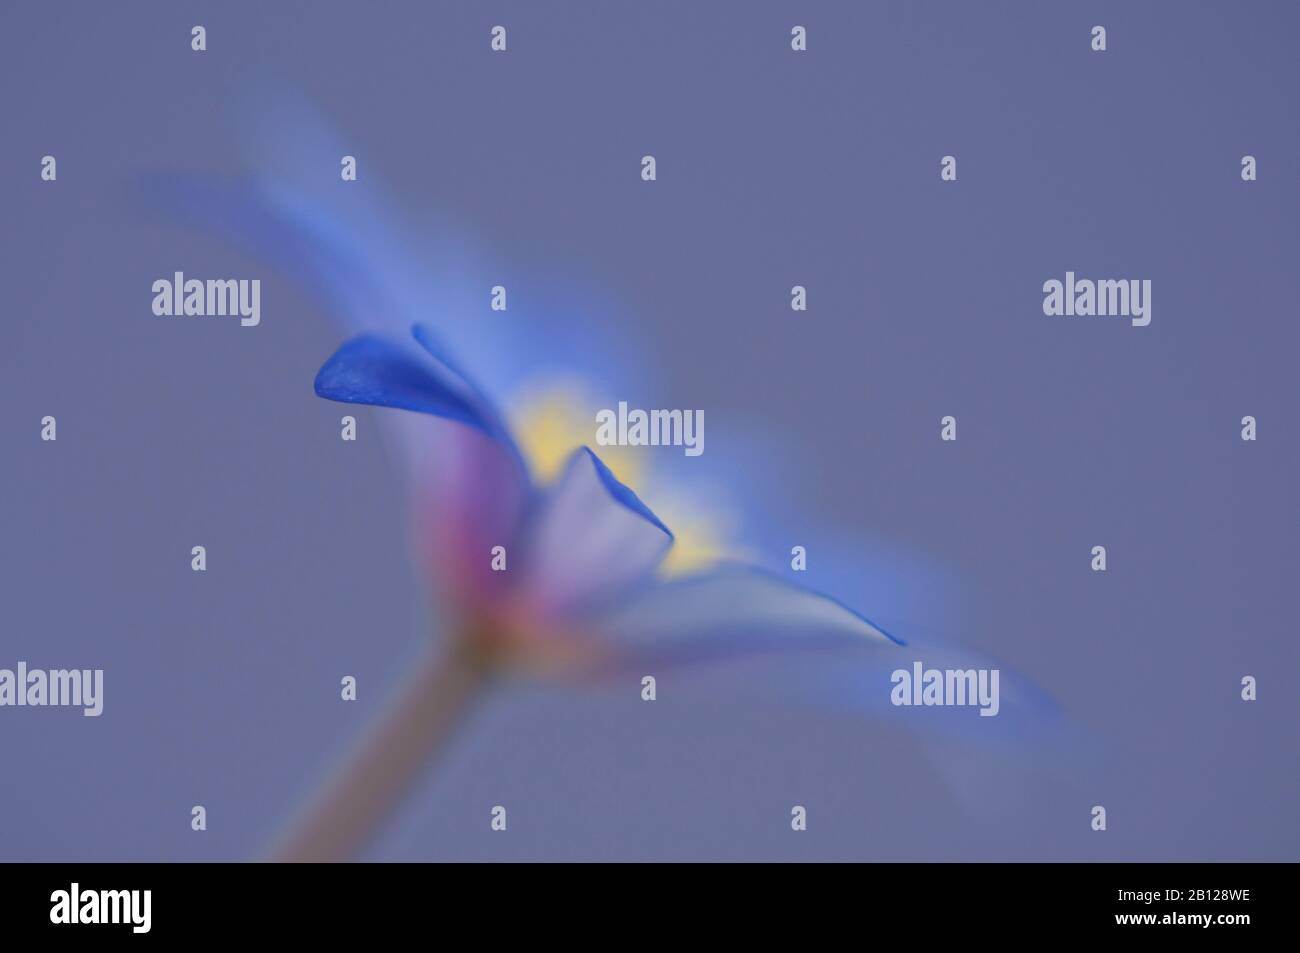 Abstract image of a blue Windflower Stock Photo